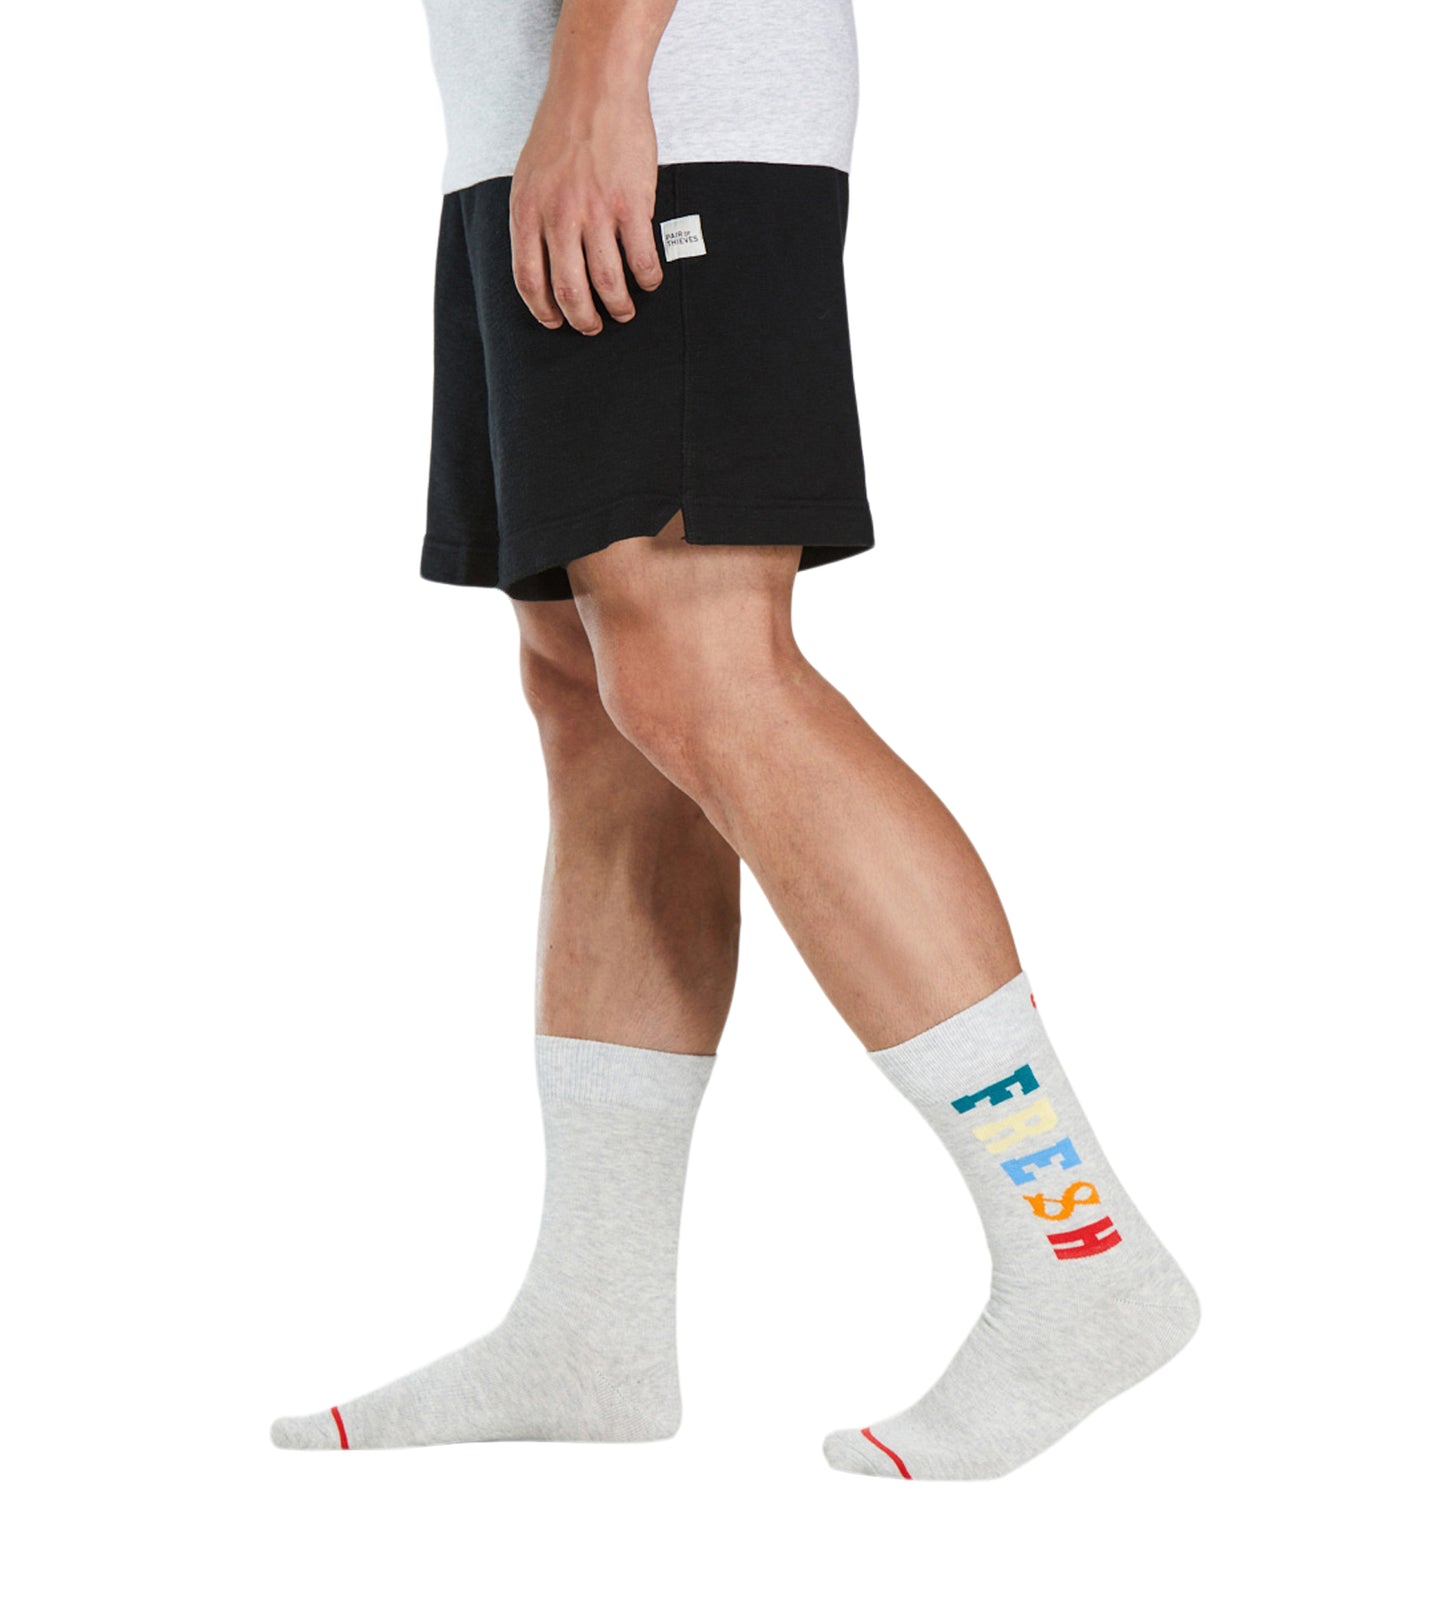 Crew Socks 3 Pack colors contain: Black, Indian red, Light Gray, Dark olive green, Tan, Sienna, Gains boro, Rosy brown, Teal